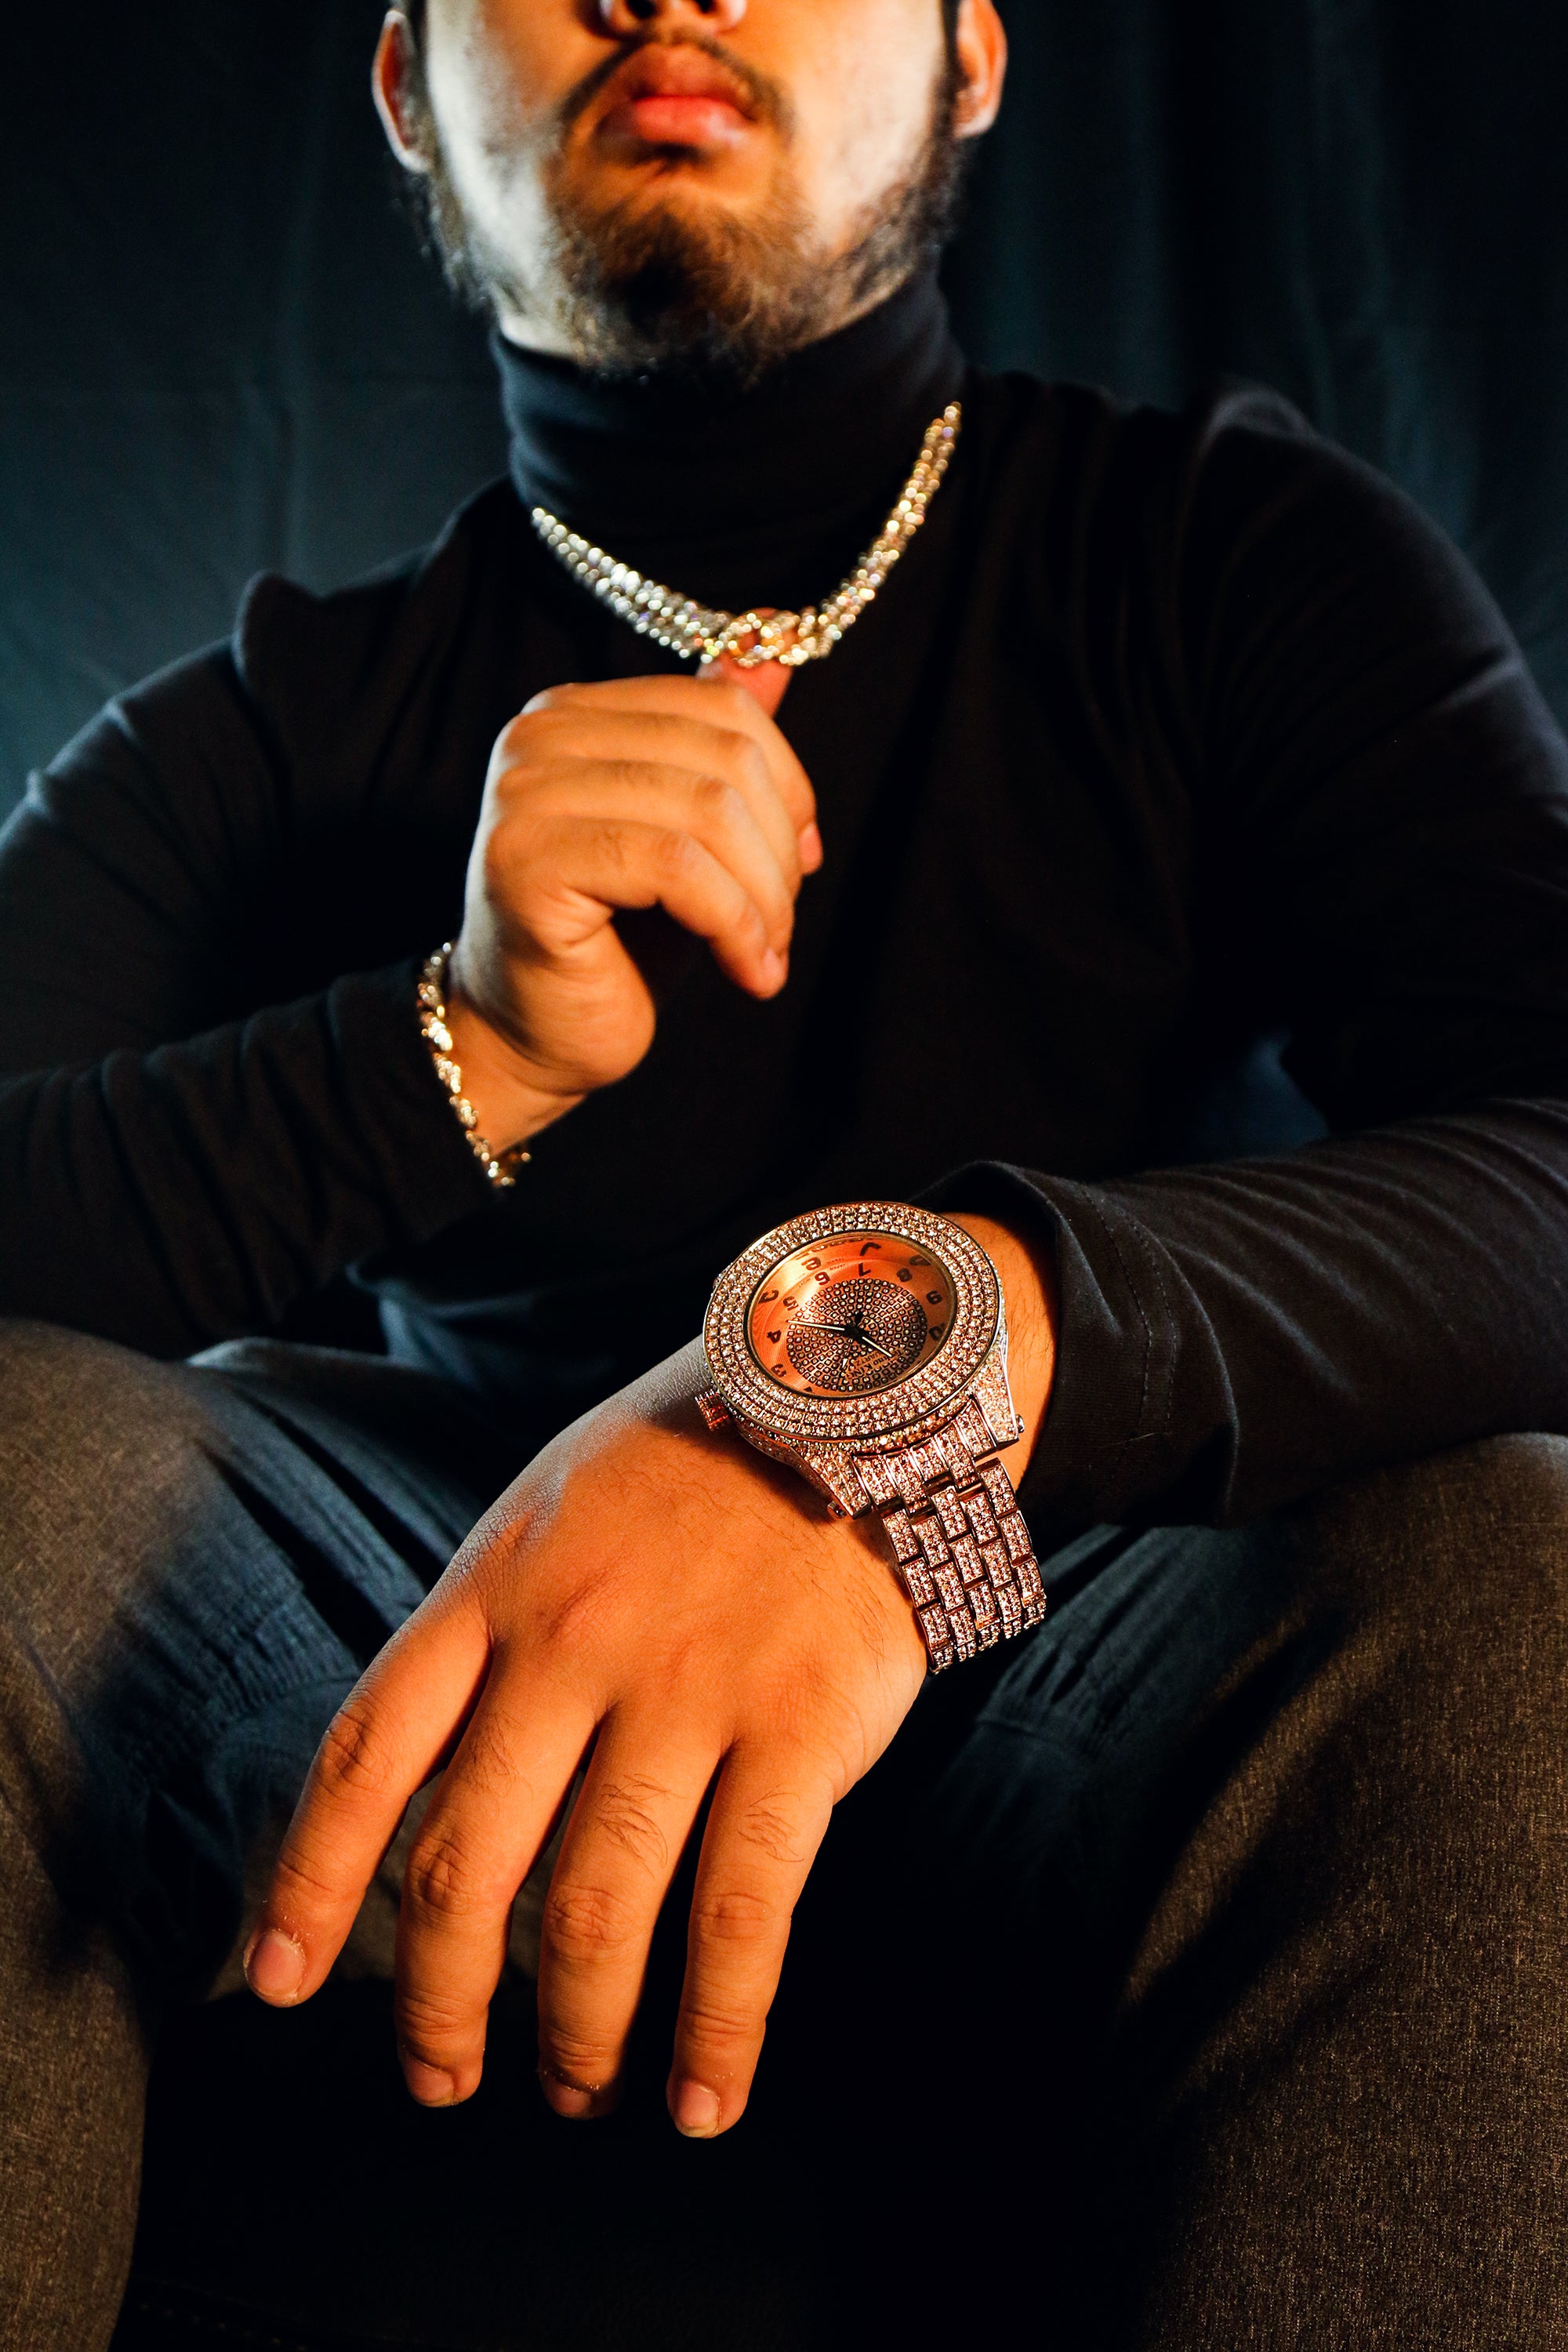 SST1 Rose Gold Iced Out / Quartz Techno KING Watch